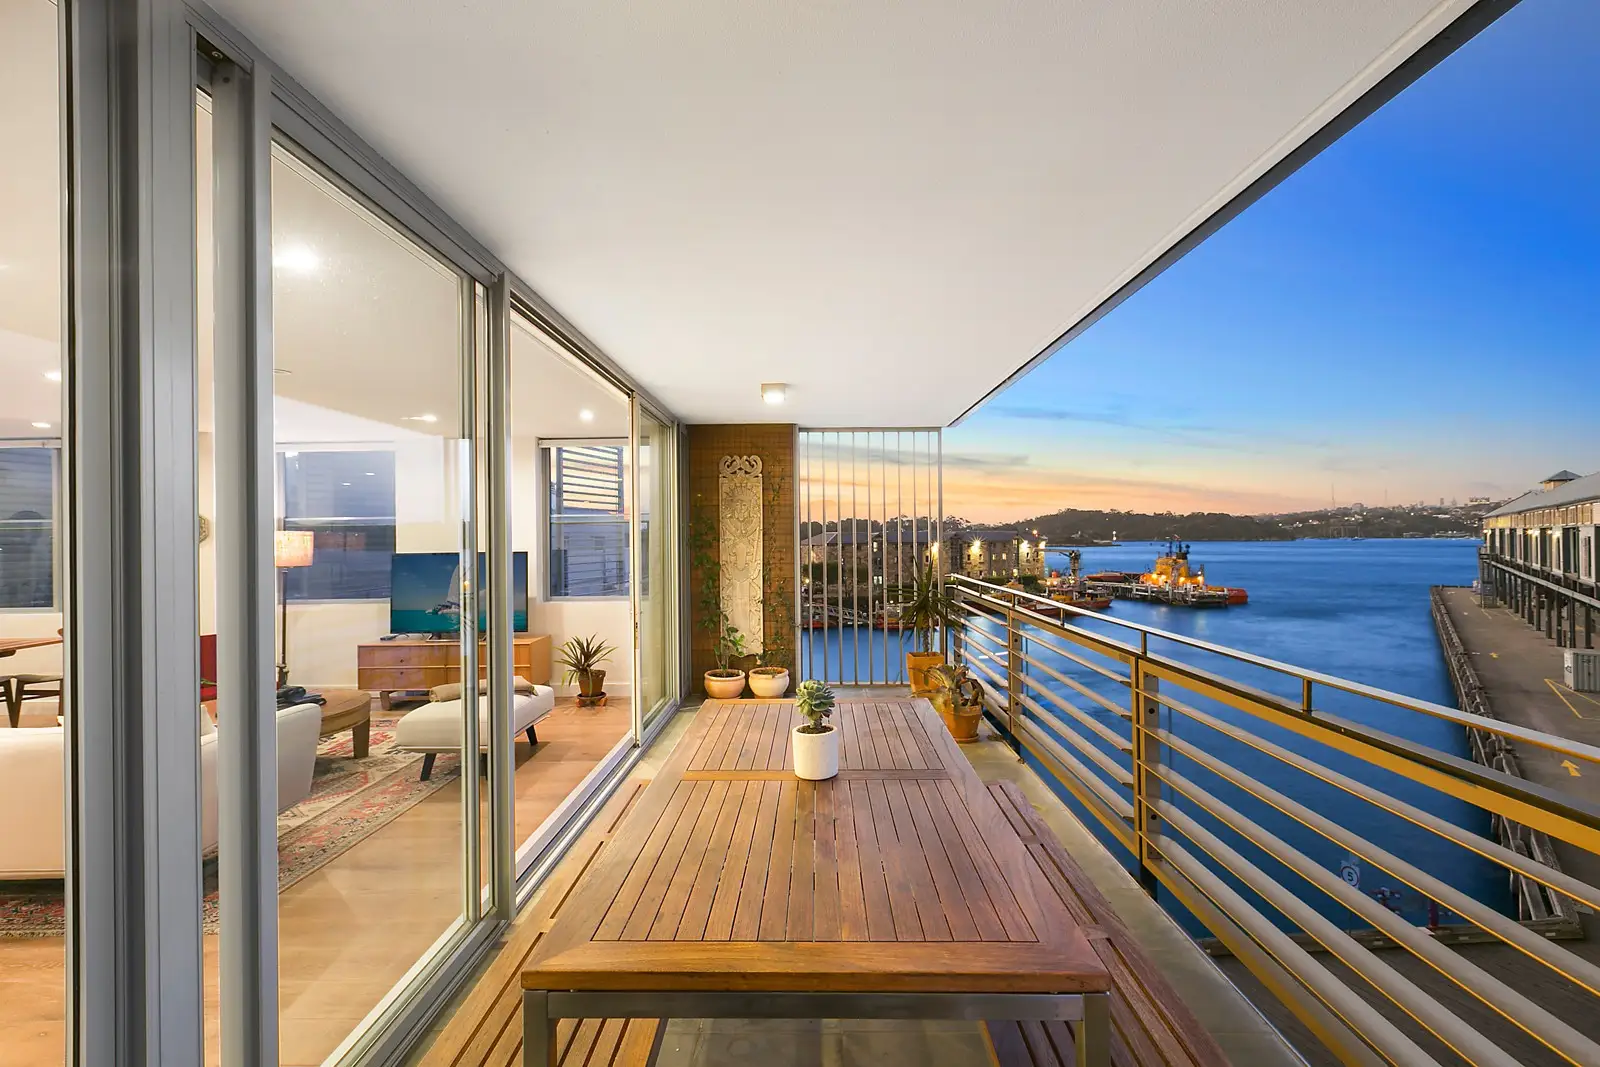 Photo #1: 401/21a Hickson Road, Walsh Bay - Sold by Sydney Sotheby's International Realty